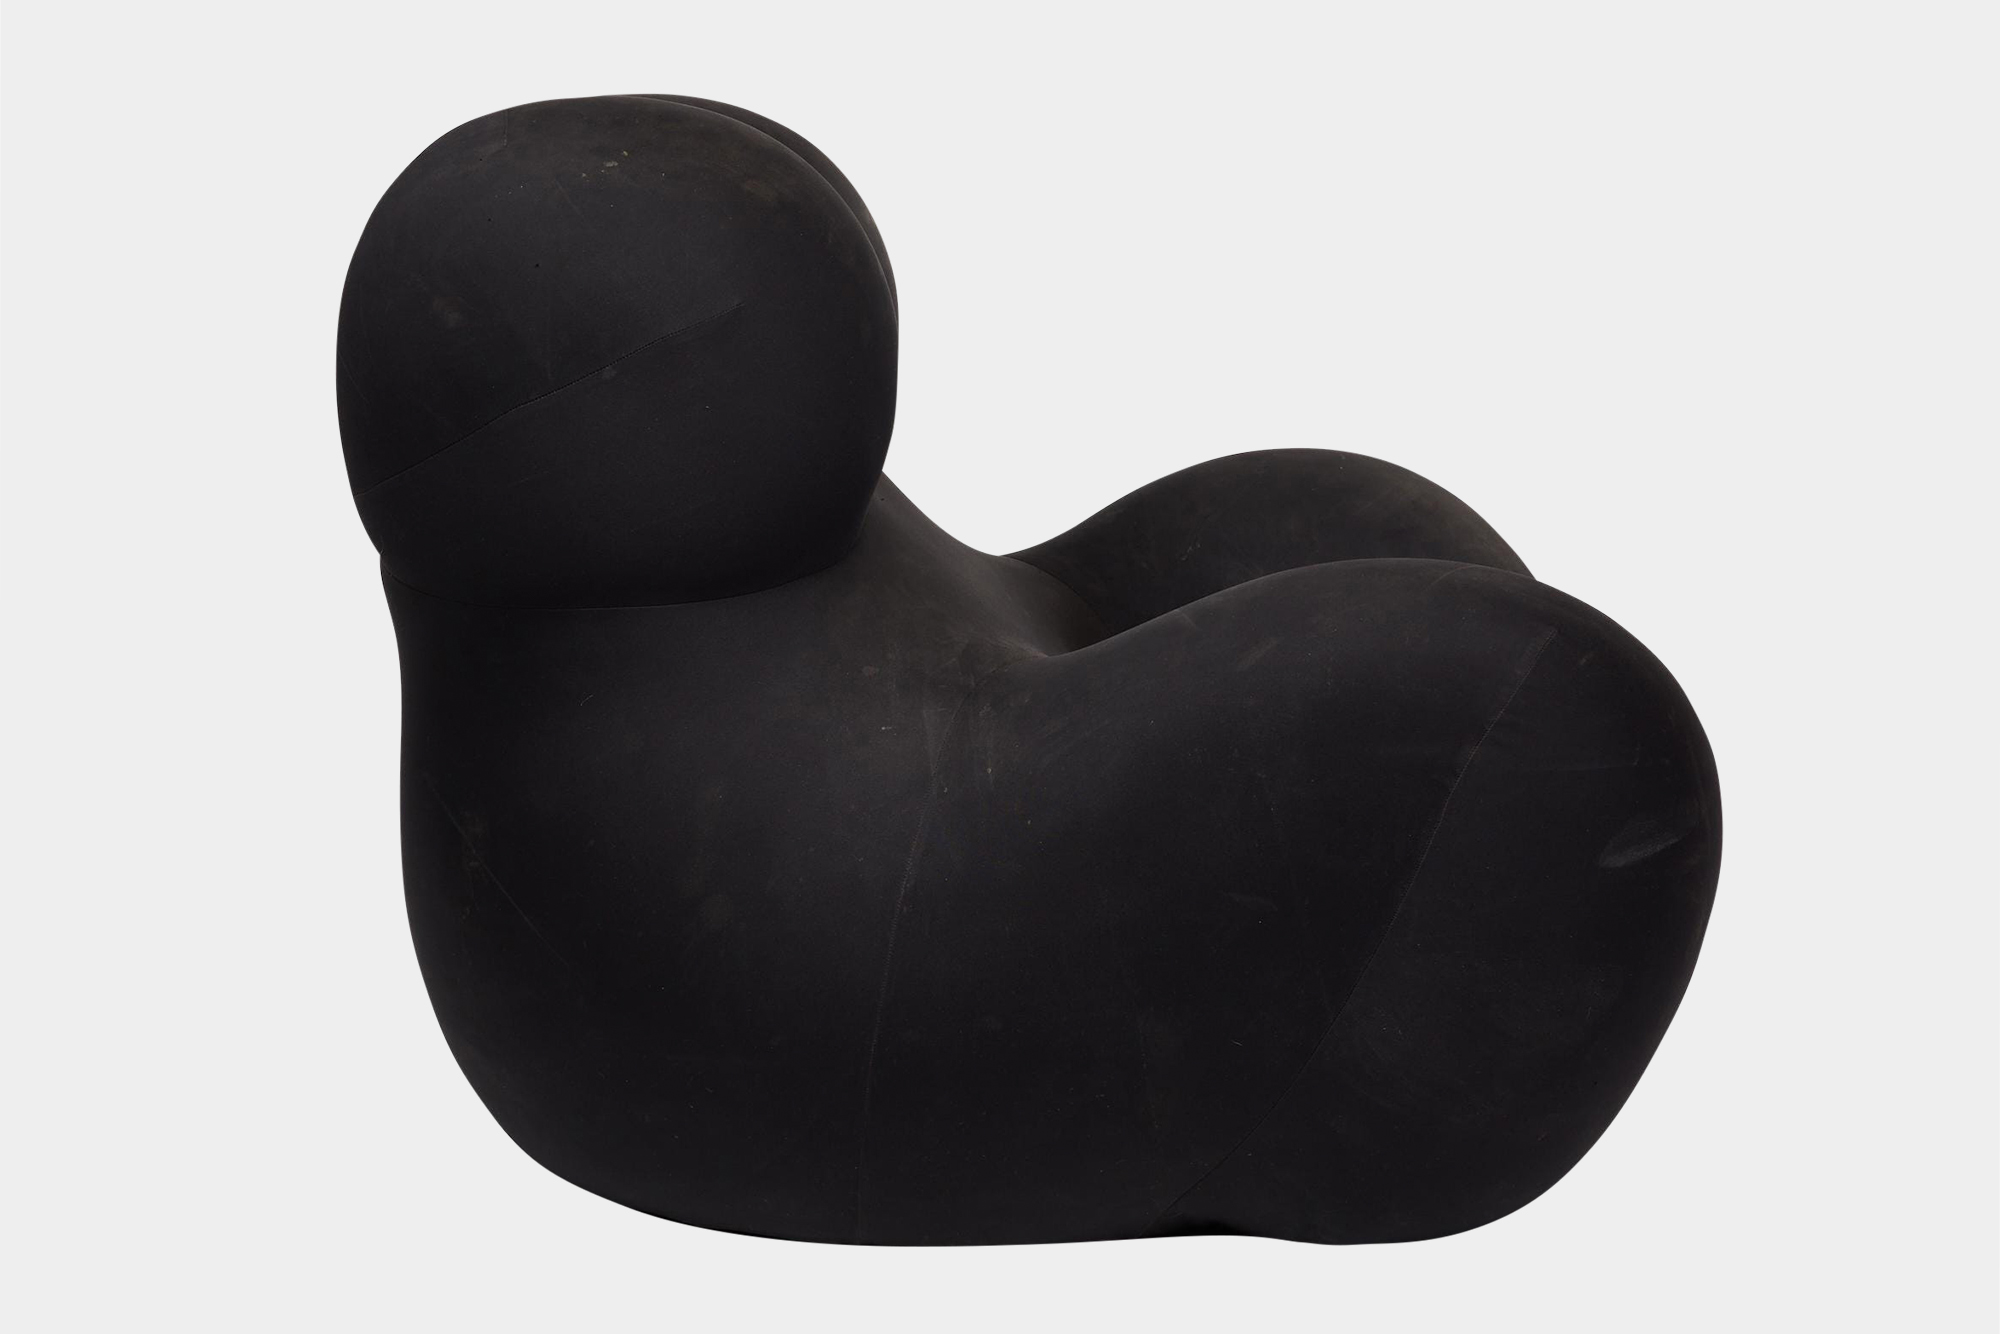 GAETANO PESCE UP 5 Lounge Chair & UP 6 Ottoman — ARCHIVED